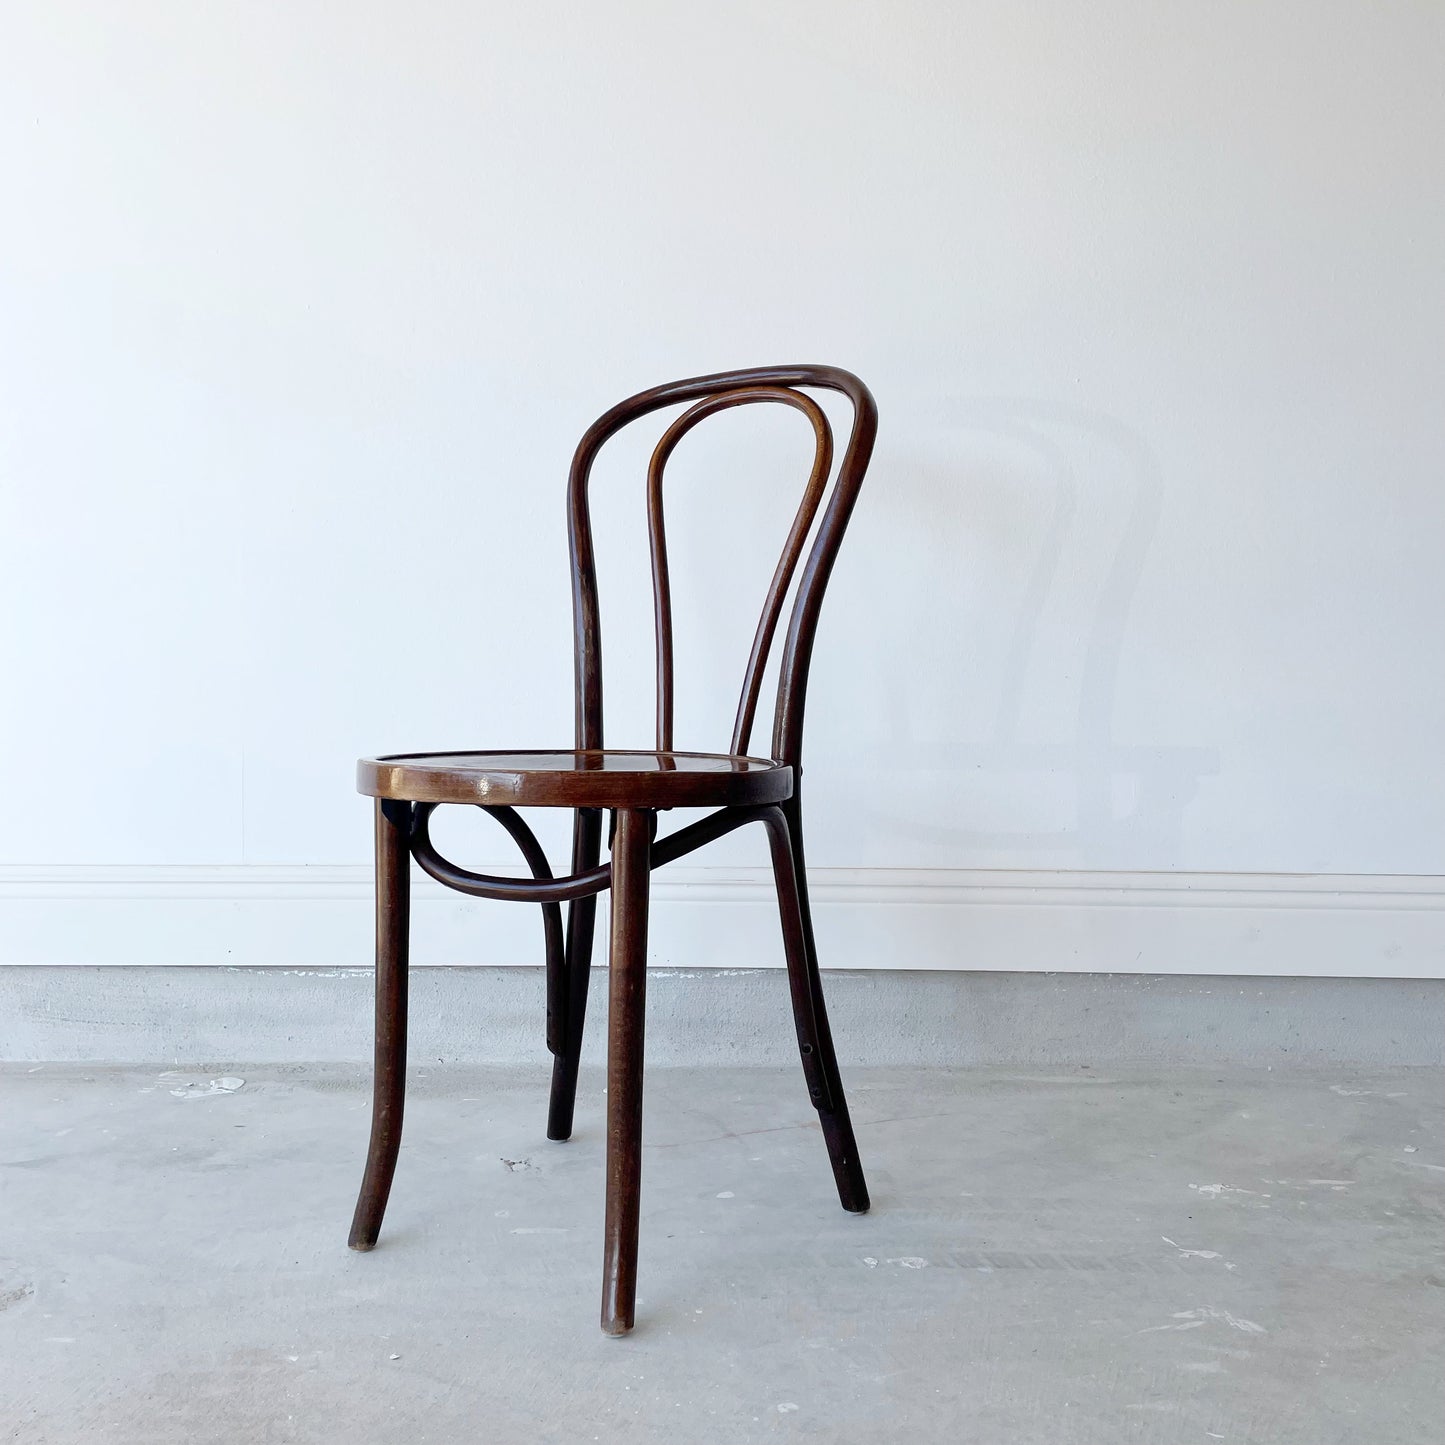 Thonet Bentwood Chair x1: See Shipping Details